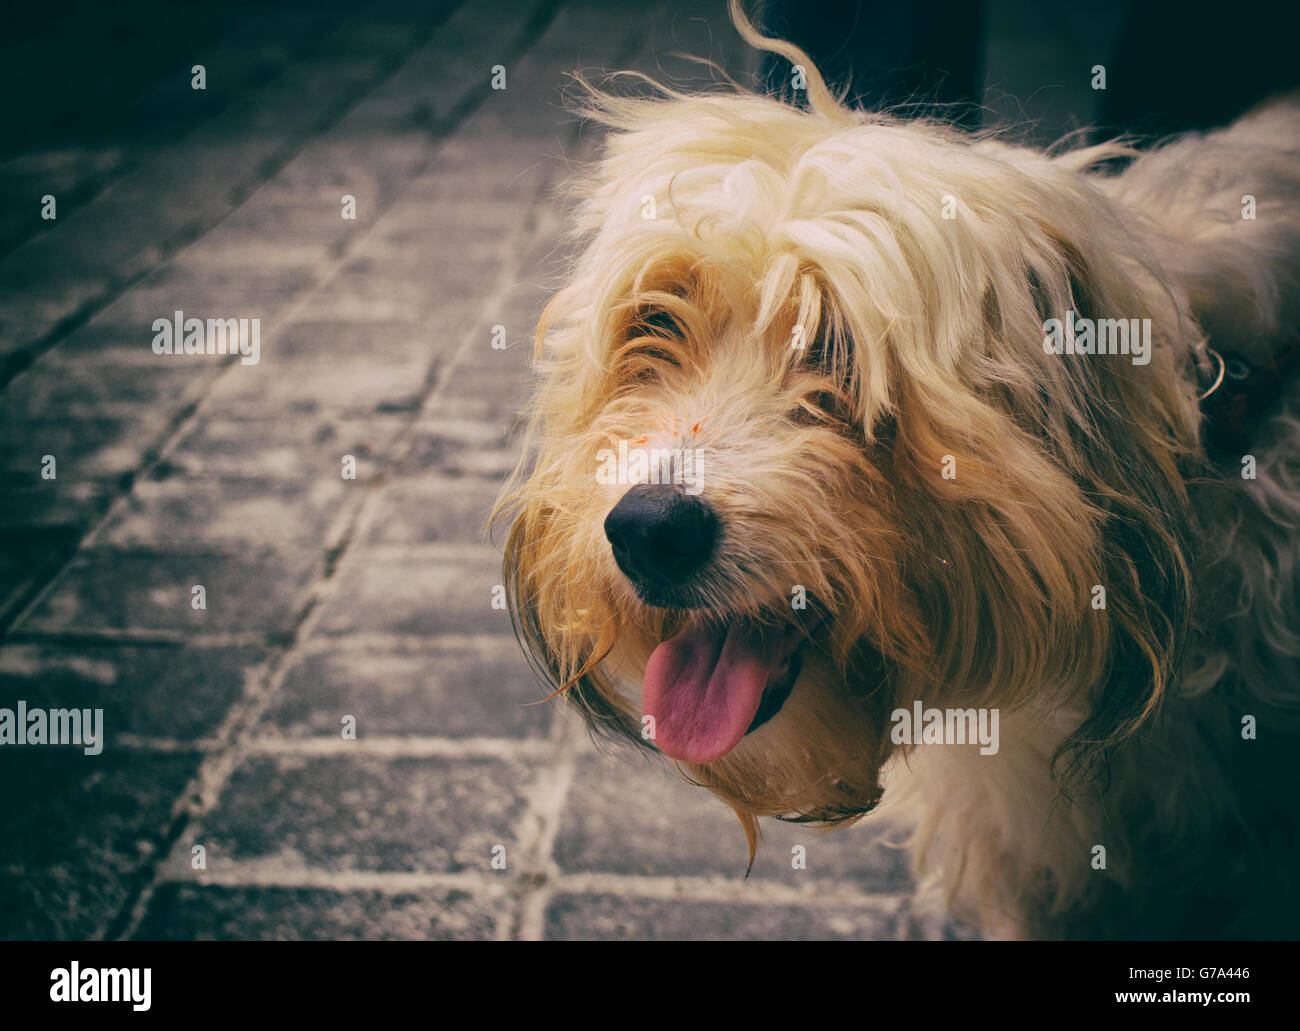 Photograph of a hairy dog on a concrete floor Stock Photo